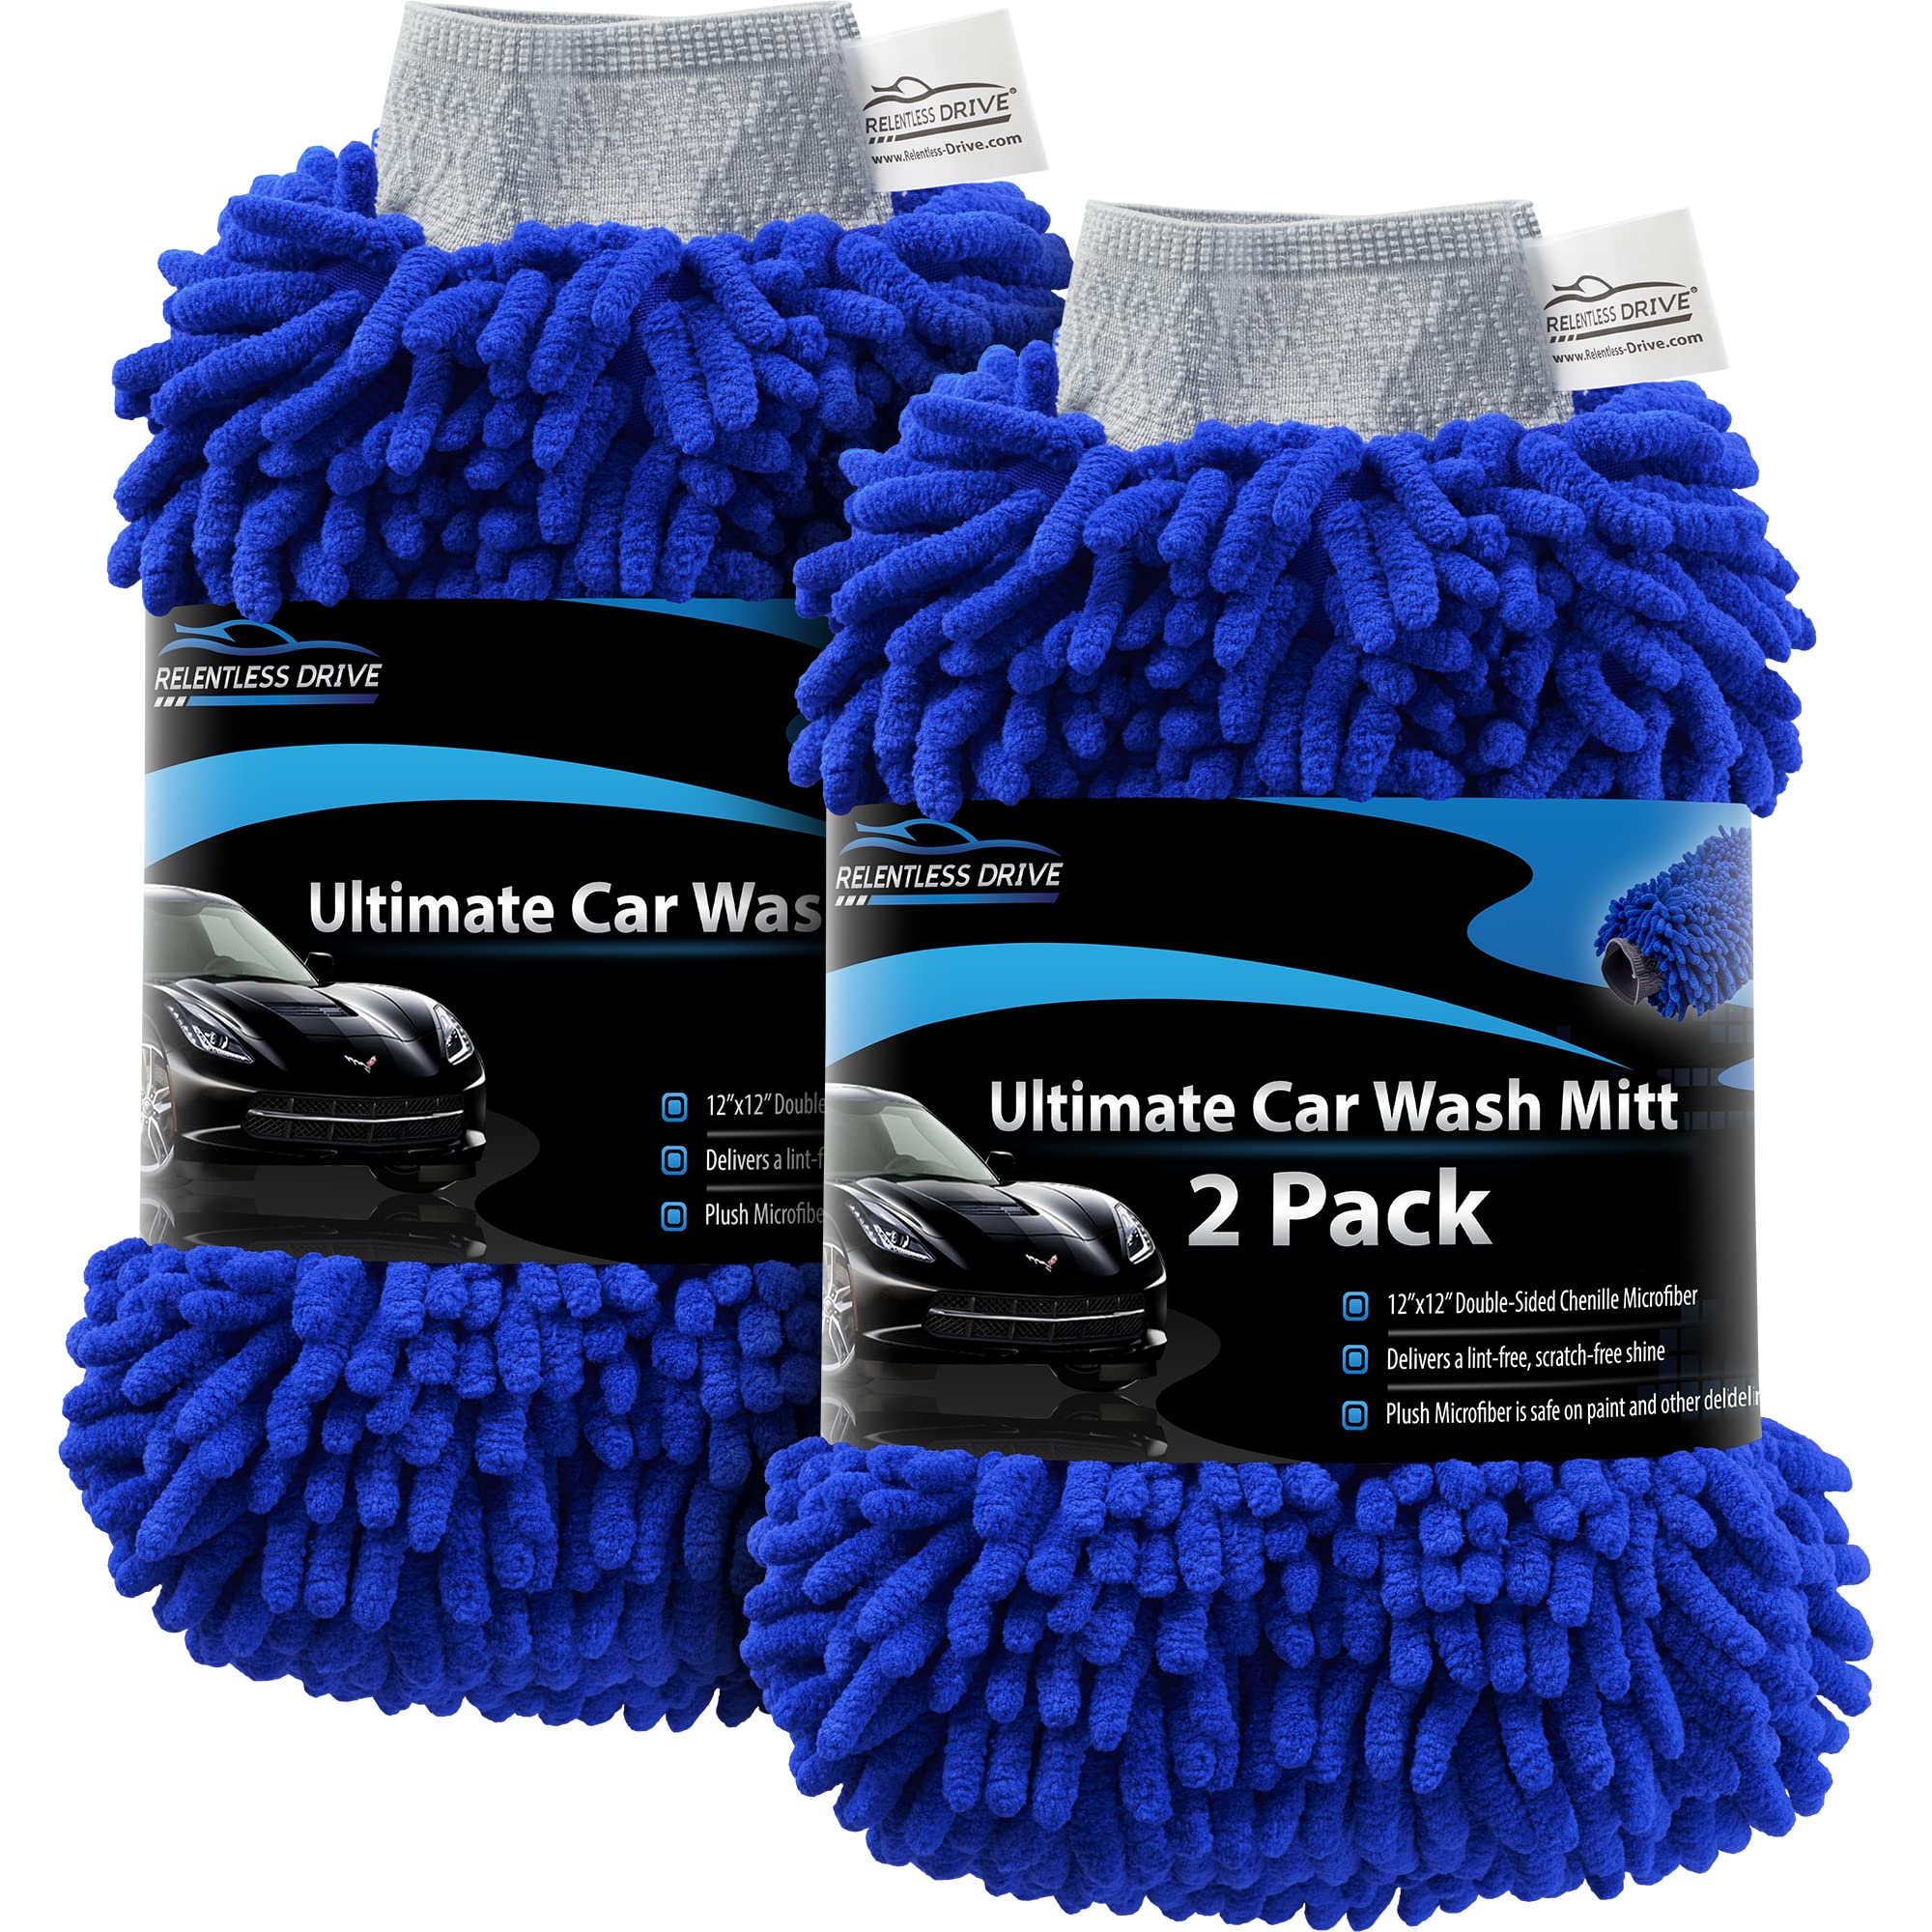 Book Cover Relentless Drive Premium Car Wash Mitt (2-pack, Extra Large) - Car Wash Sponge - Chenille Microfiber Car Wash Mitt Scratch Free - Ultra Absorbent Microfiber Mitt for Cars, Trucks, SUVs, Boats & Motorcycles Extra Large, 2 pack